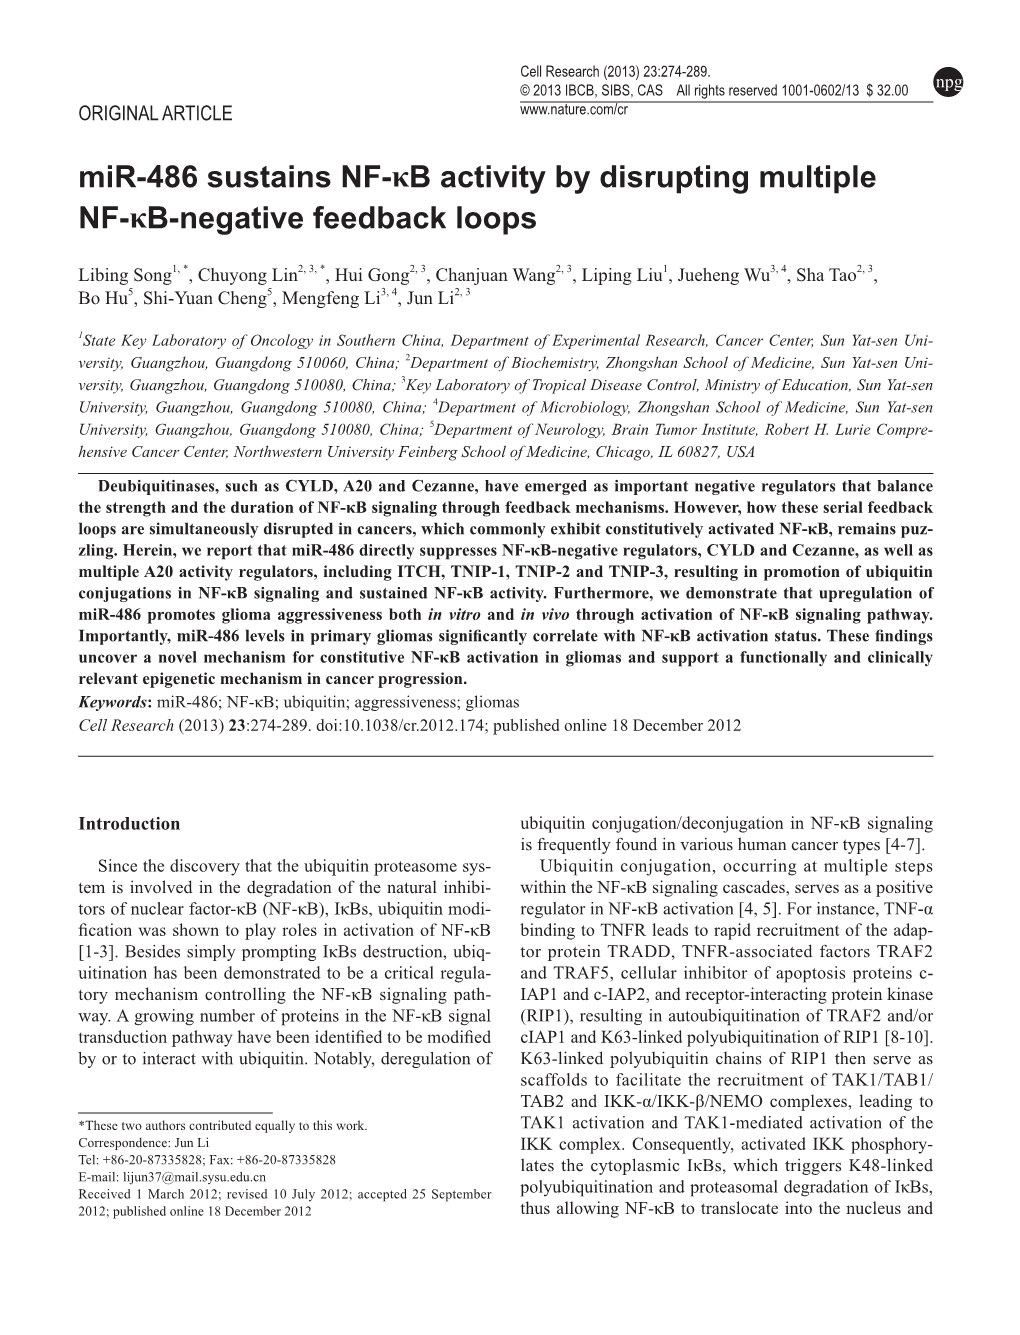 Mir-486 Sustains NF-Κb Activity by Disrupting Multiple NF-Κb-Negative Feedback Loops